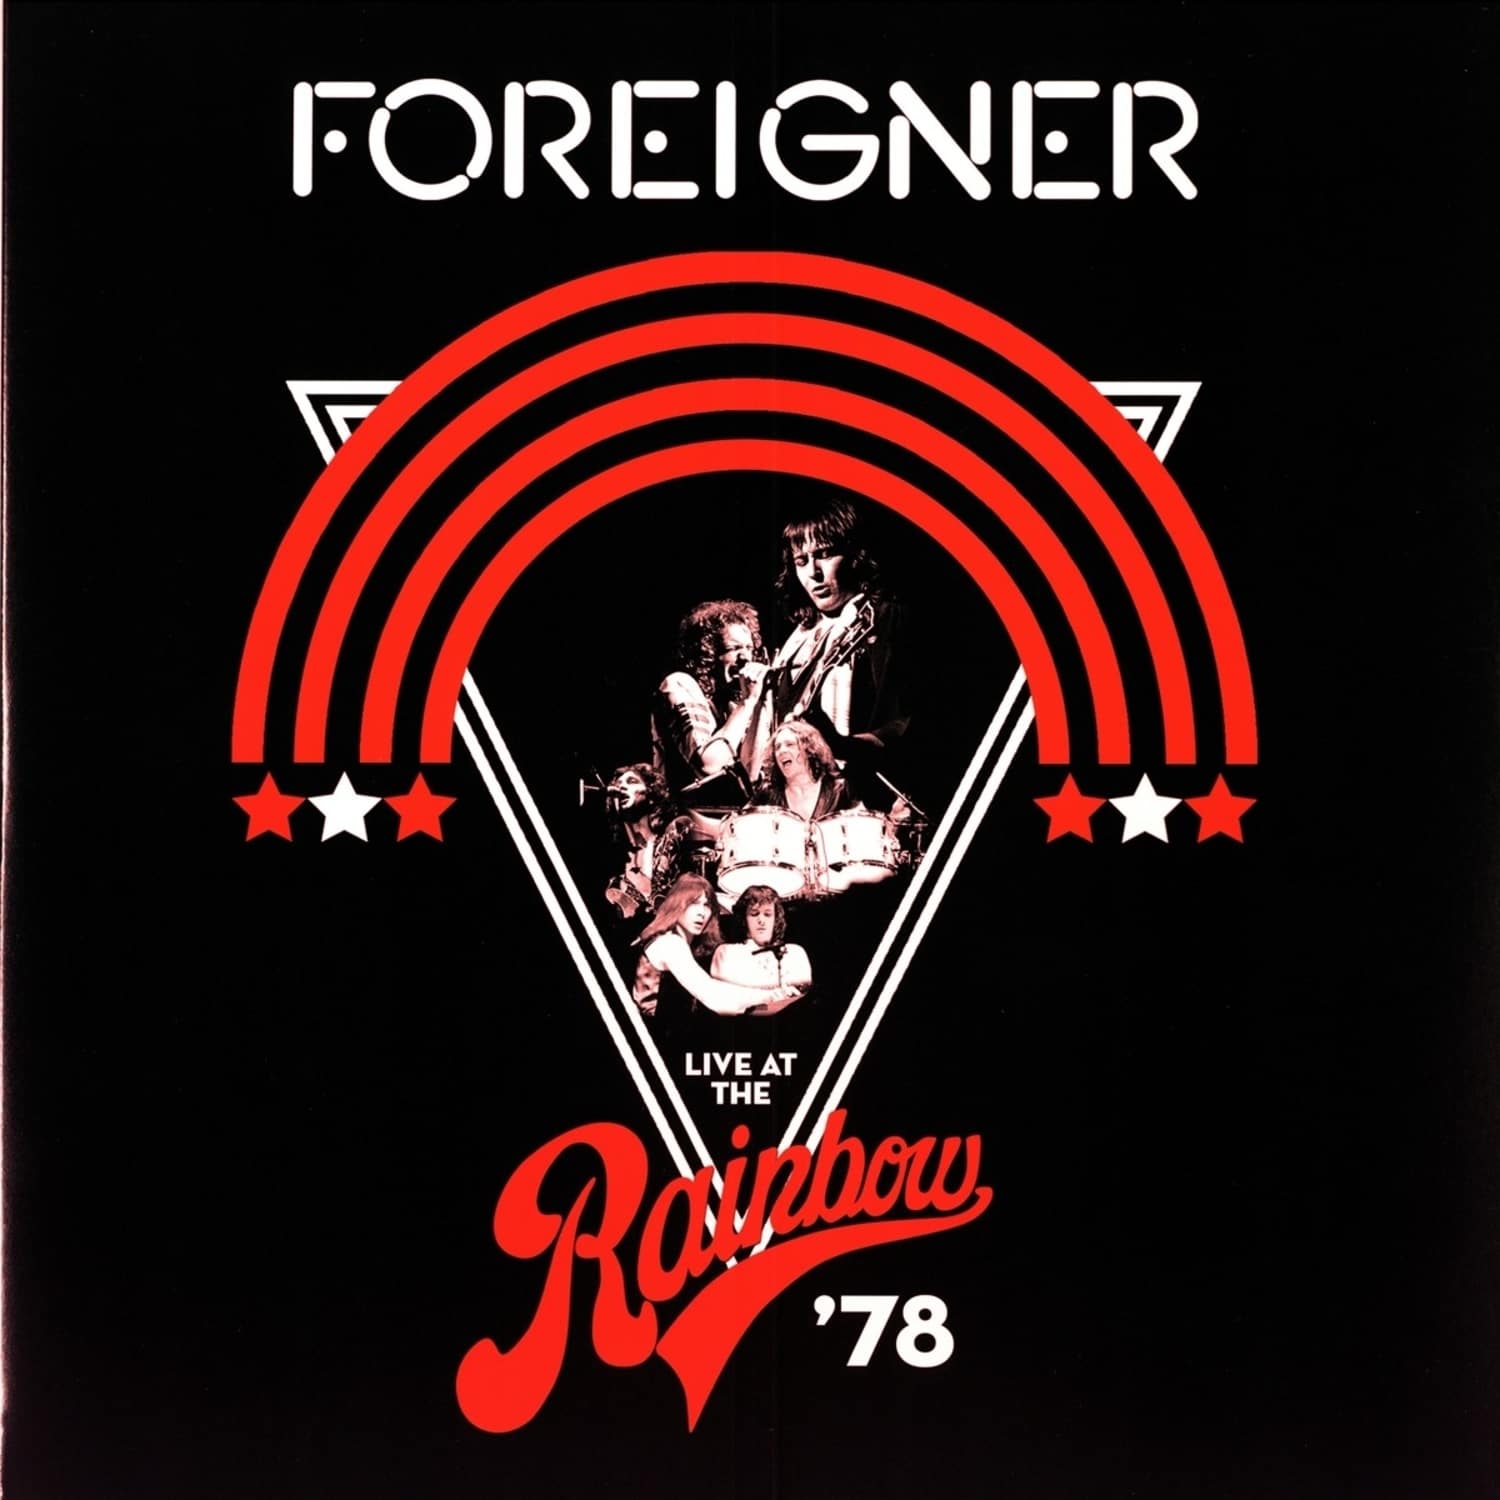 Foreigner - LIVE AT THE RAINBOW 78 